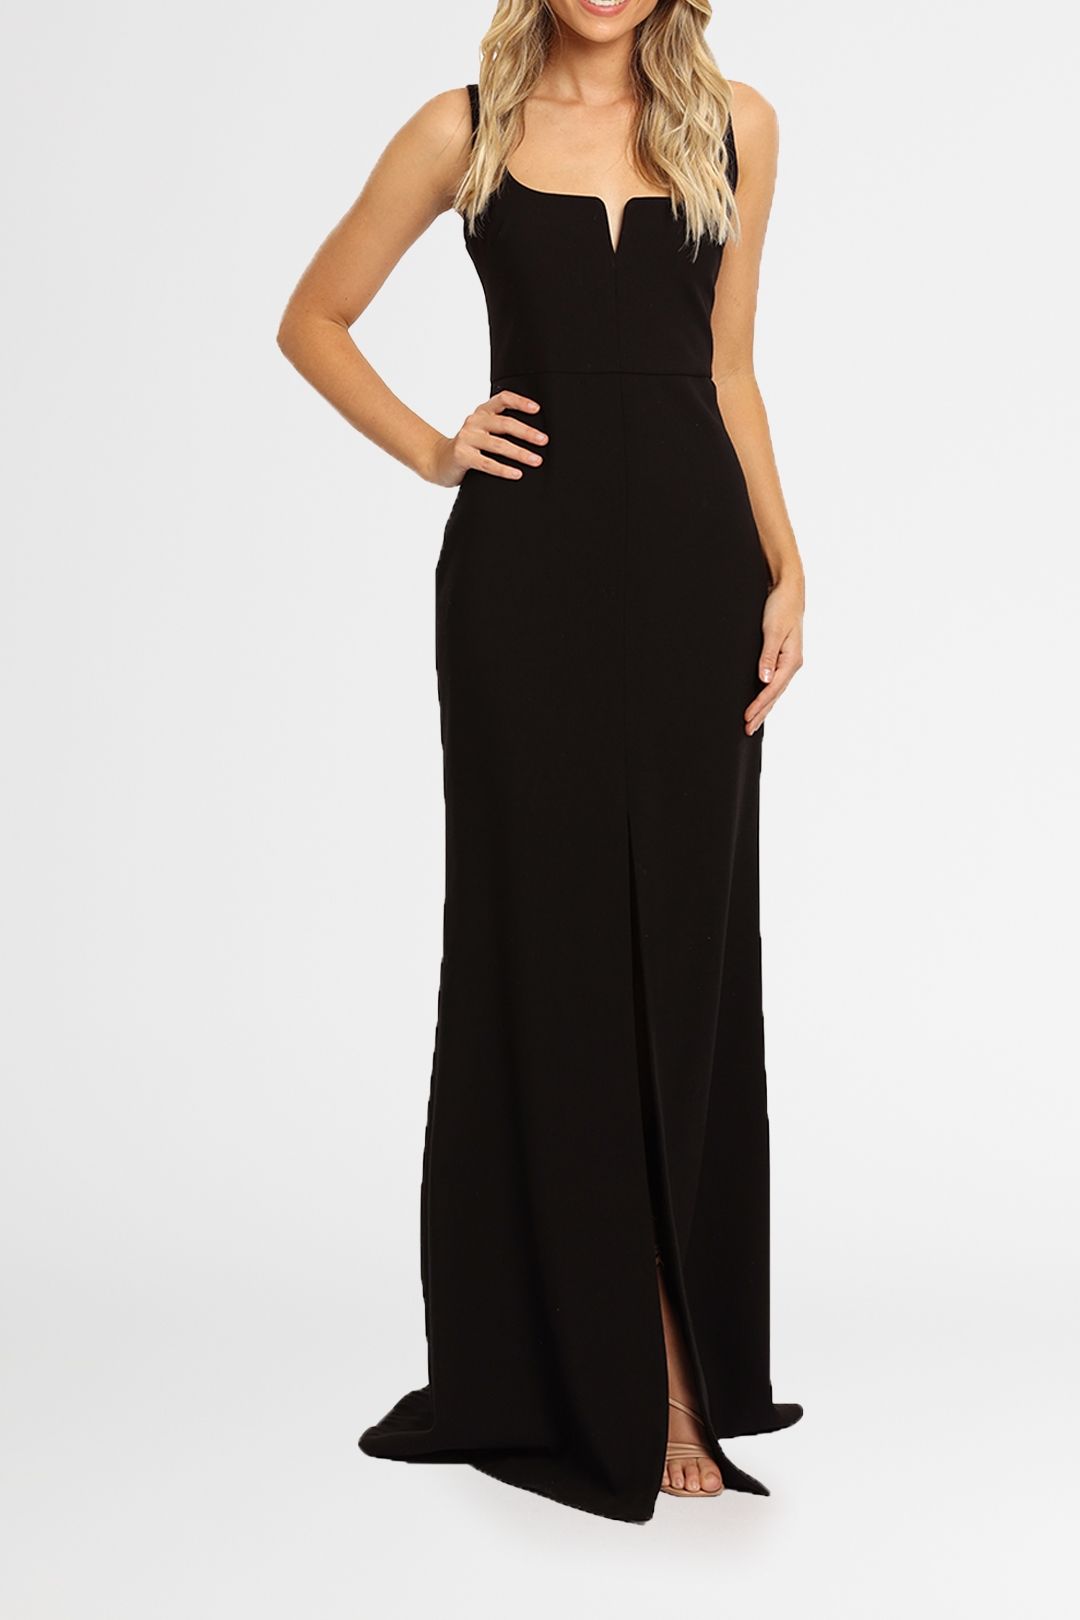 Likely NYC Constance Gown in Black